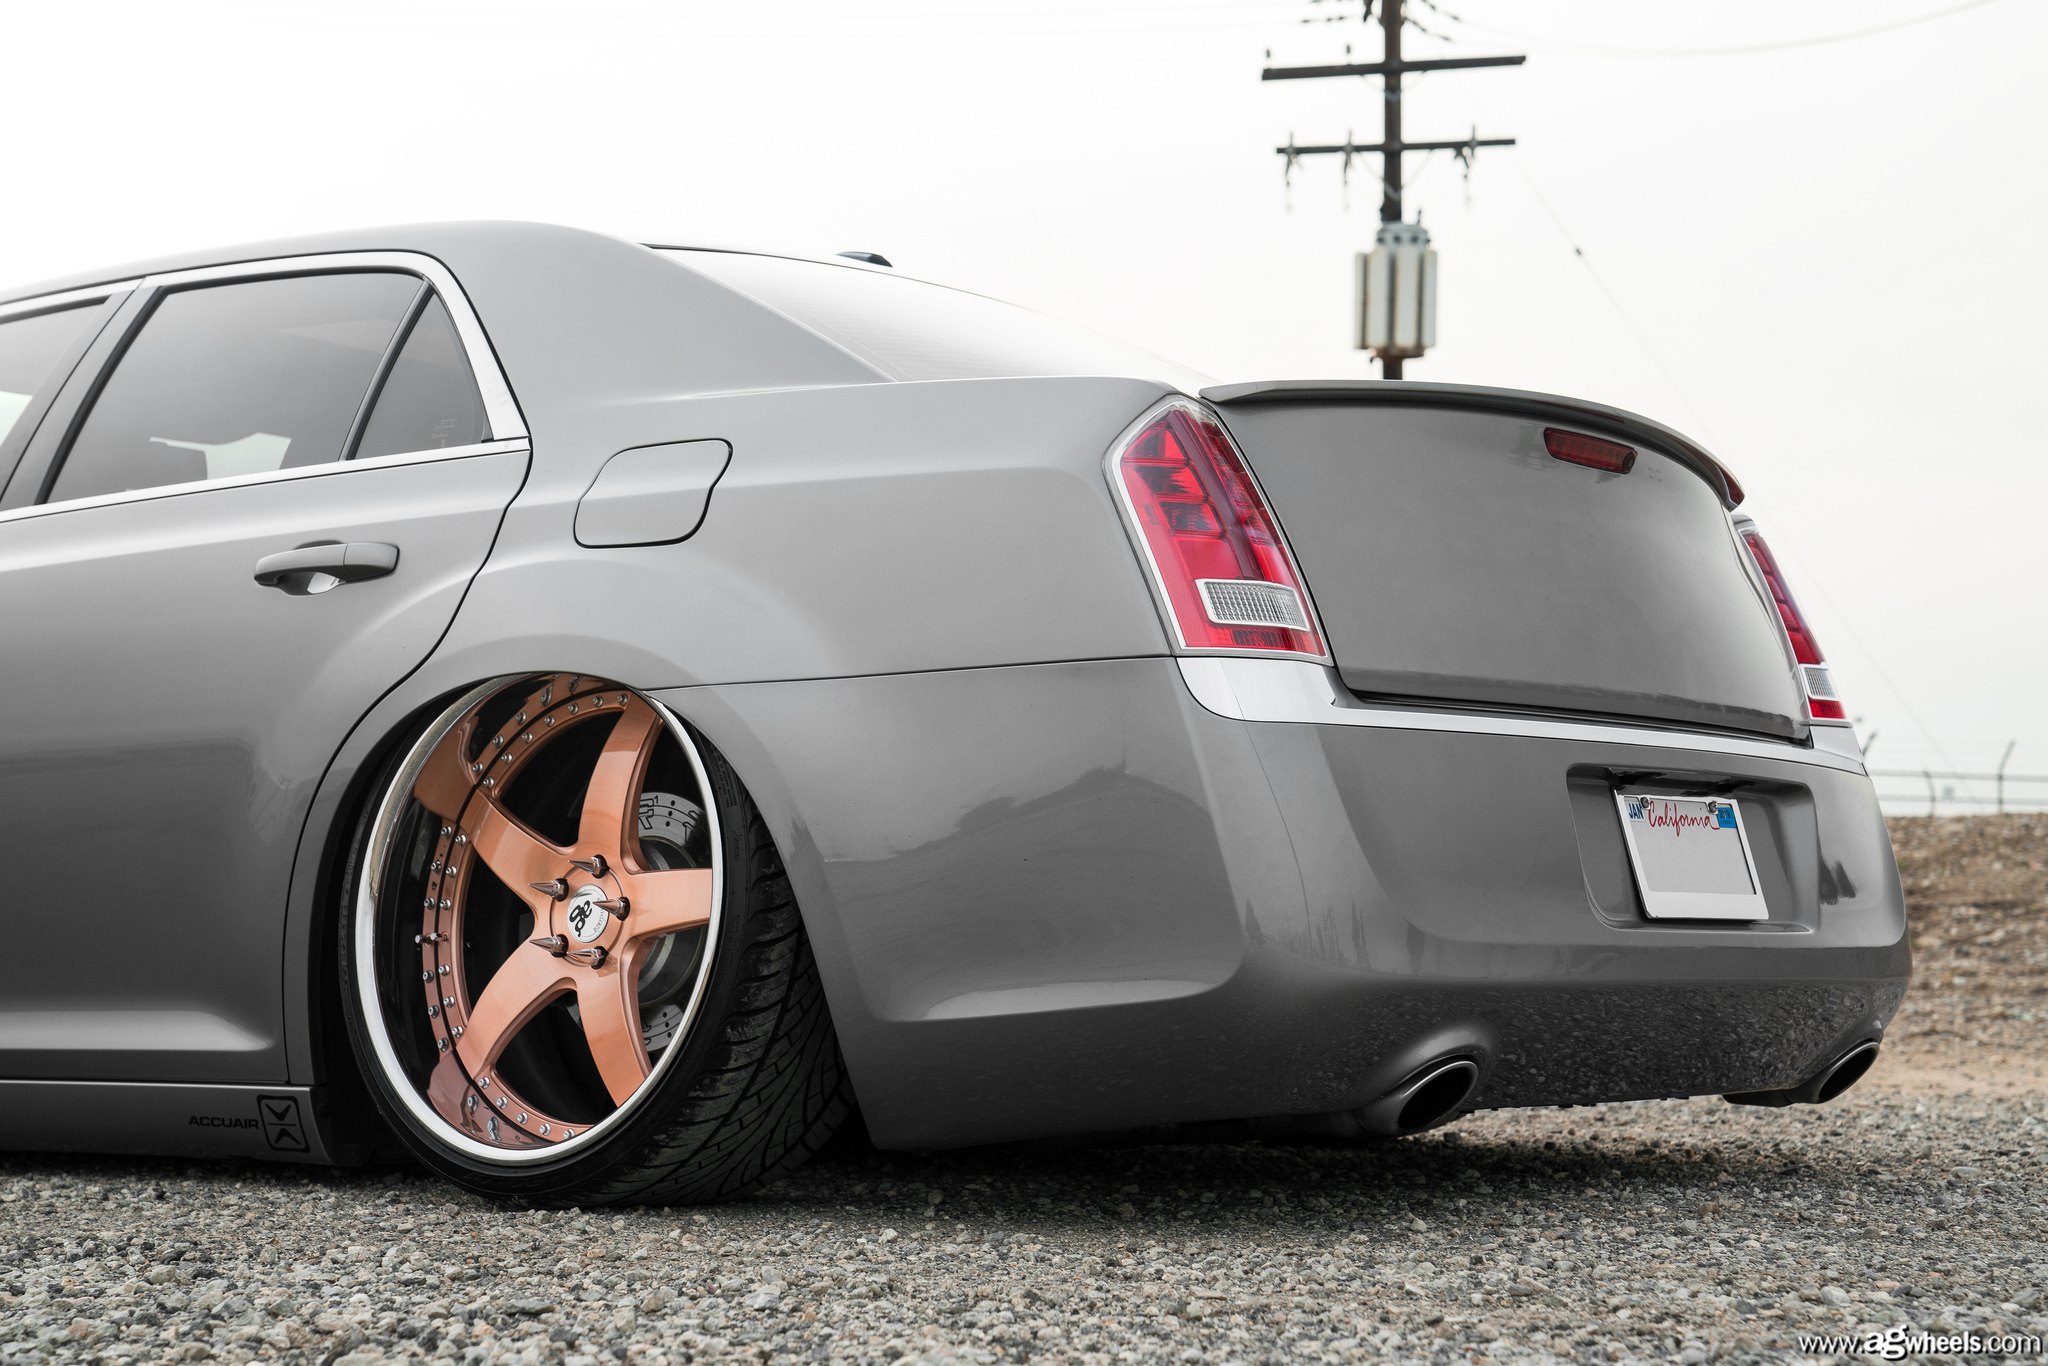 Red LED Taillights on Gray Chrysler 300 - Photo by Avant Garde Wheels